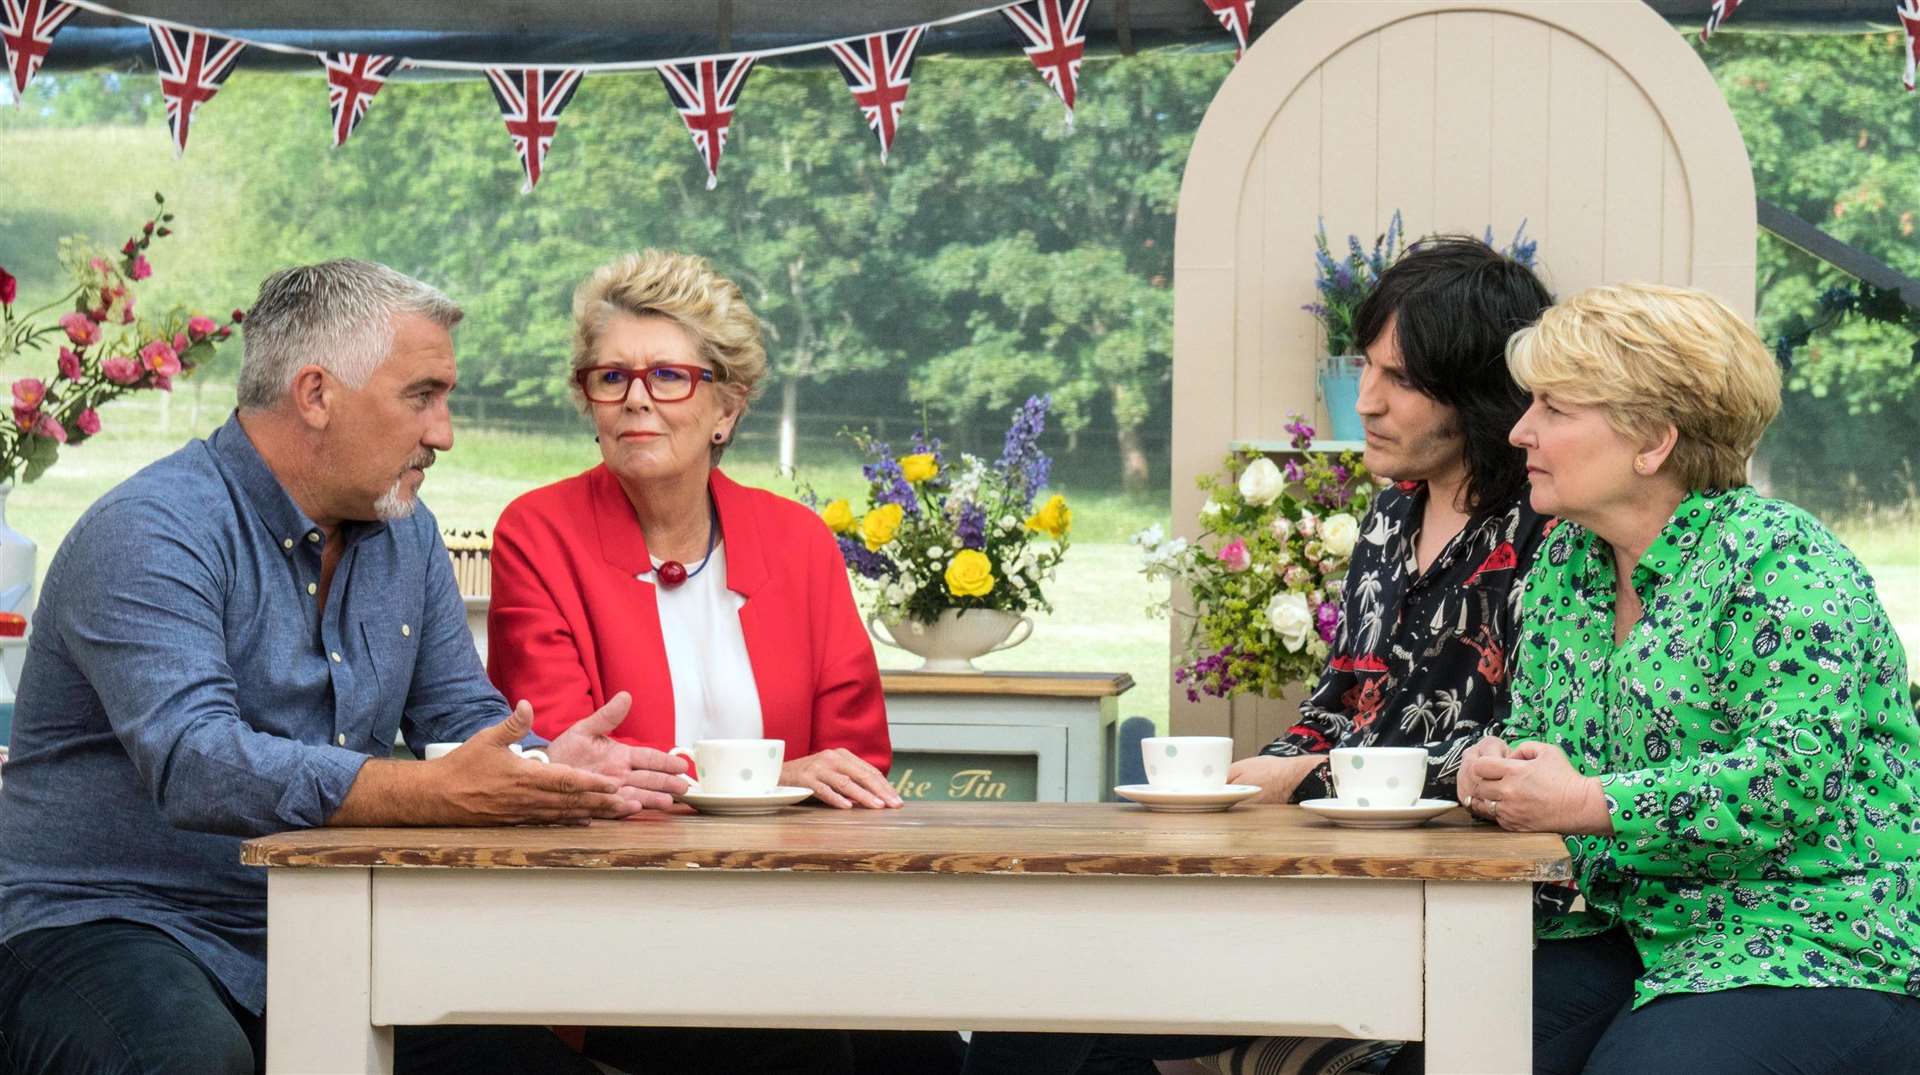 The Great British Bake Off line-up: Paul Hollywood, Sandi Toksvig, Noel Fielding, Prue Leith Picture: Channel 4